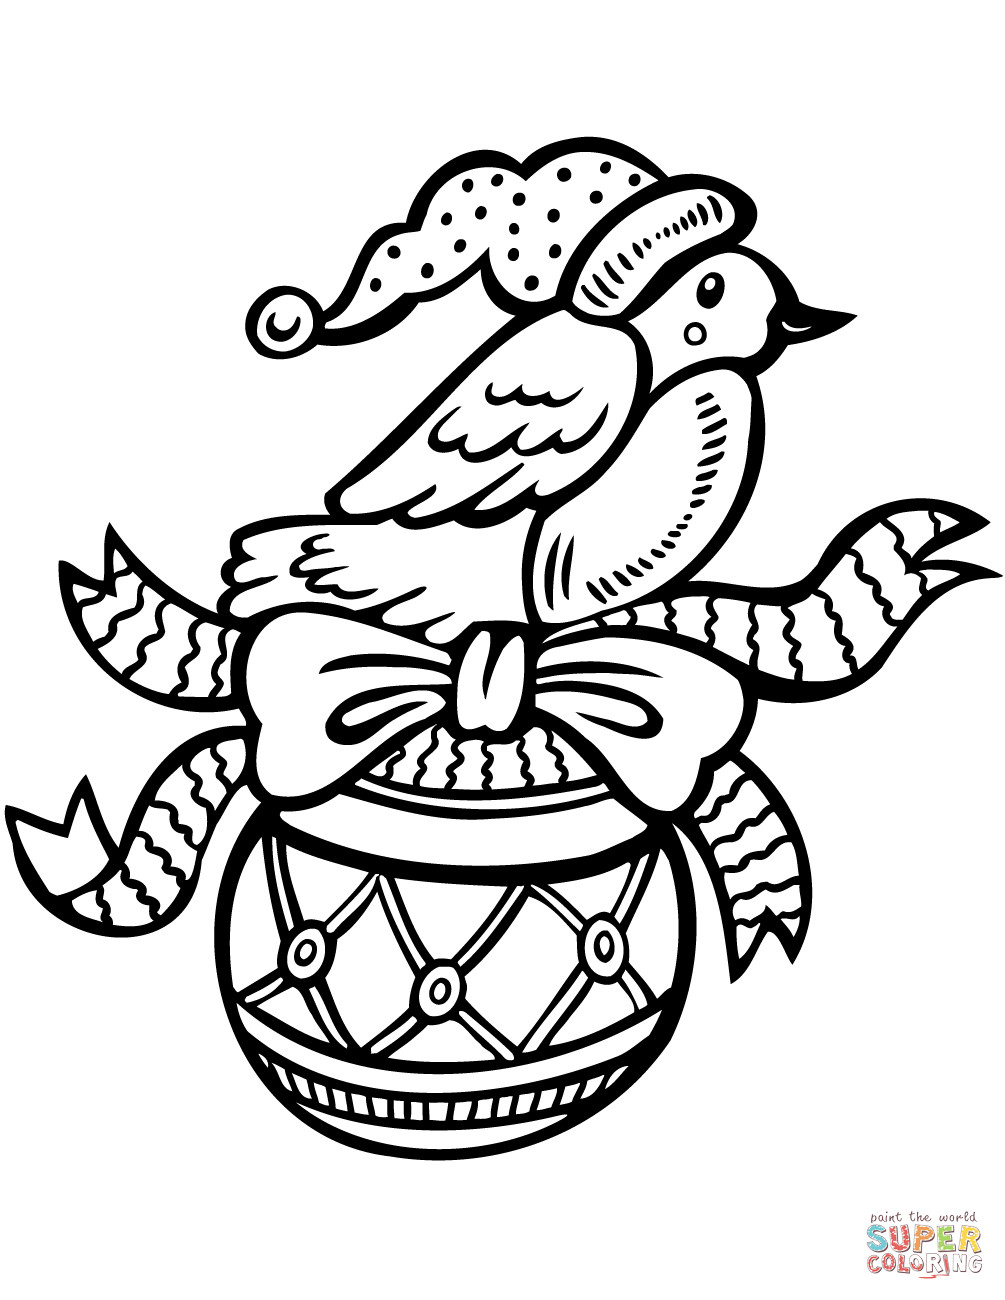 Christmas Ornaments Coloring Pages Printable
 Christmas Ornament with Bird coloring page